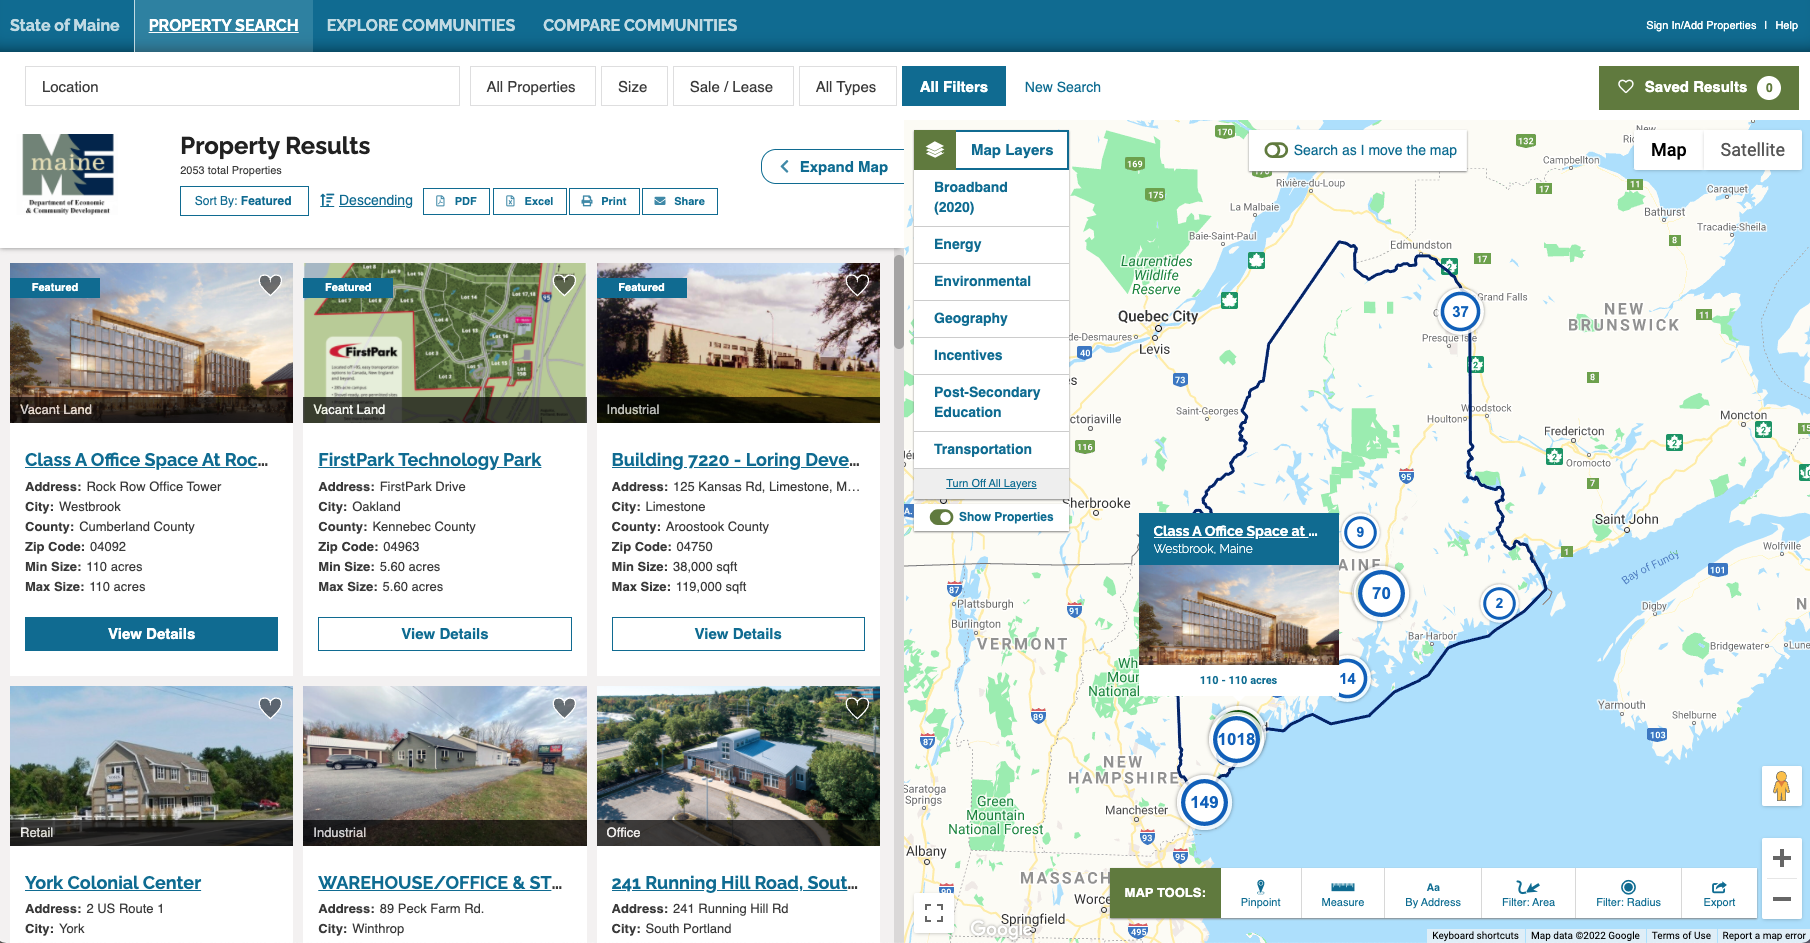 State of Maine economic development site selection software